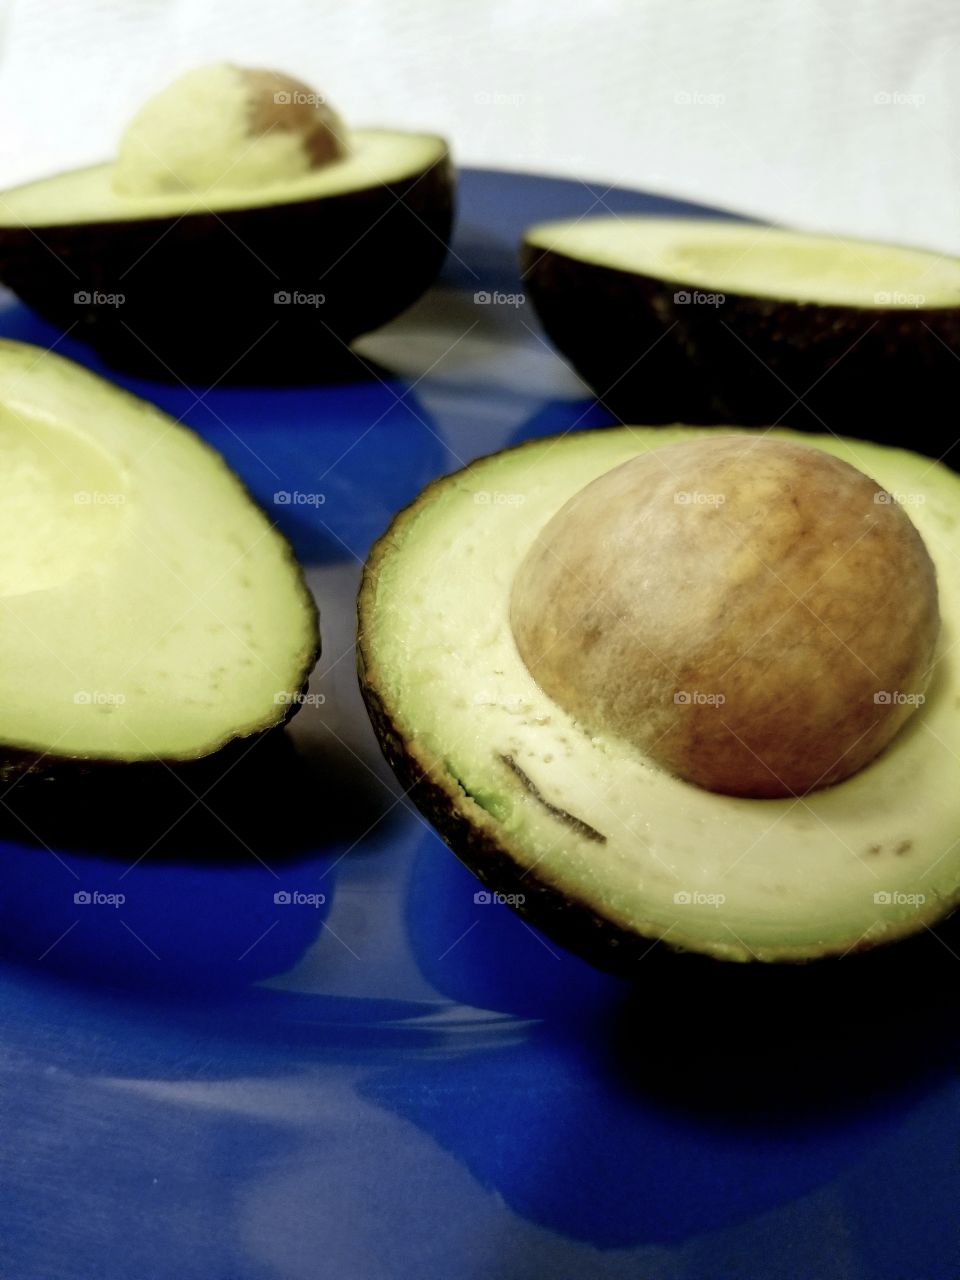 Halved, ripe avocados presented on a blue plate.